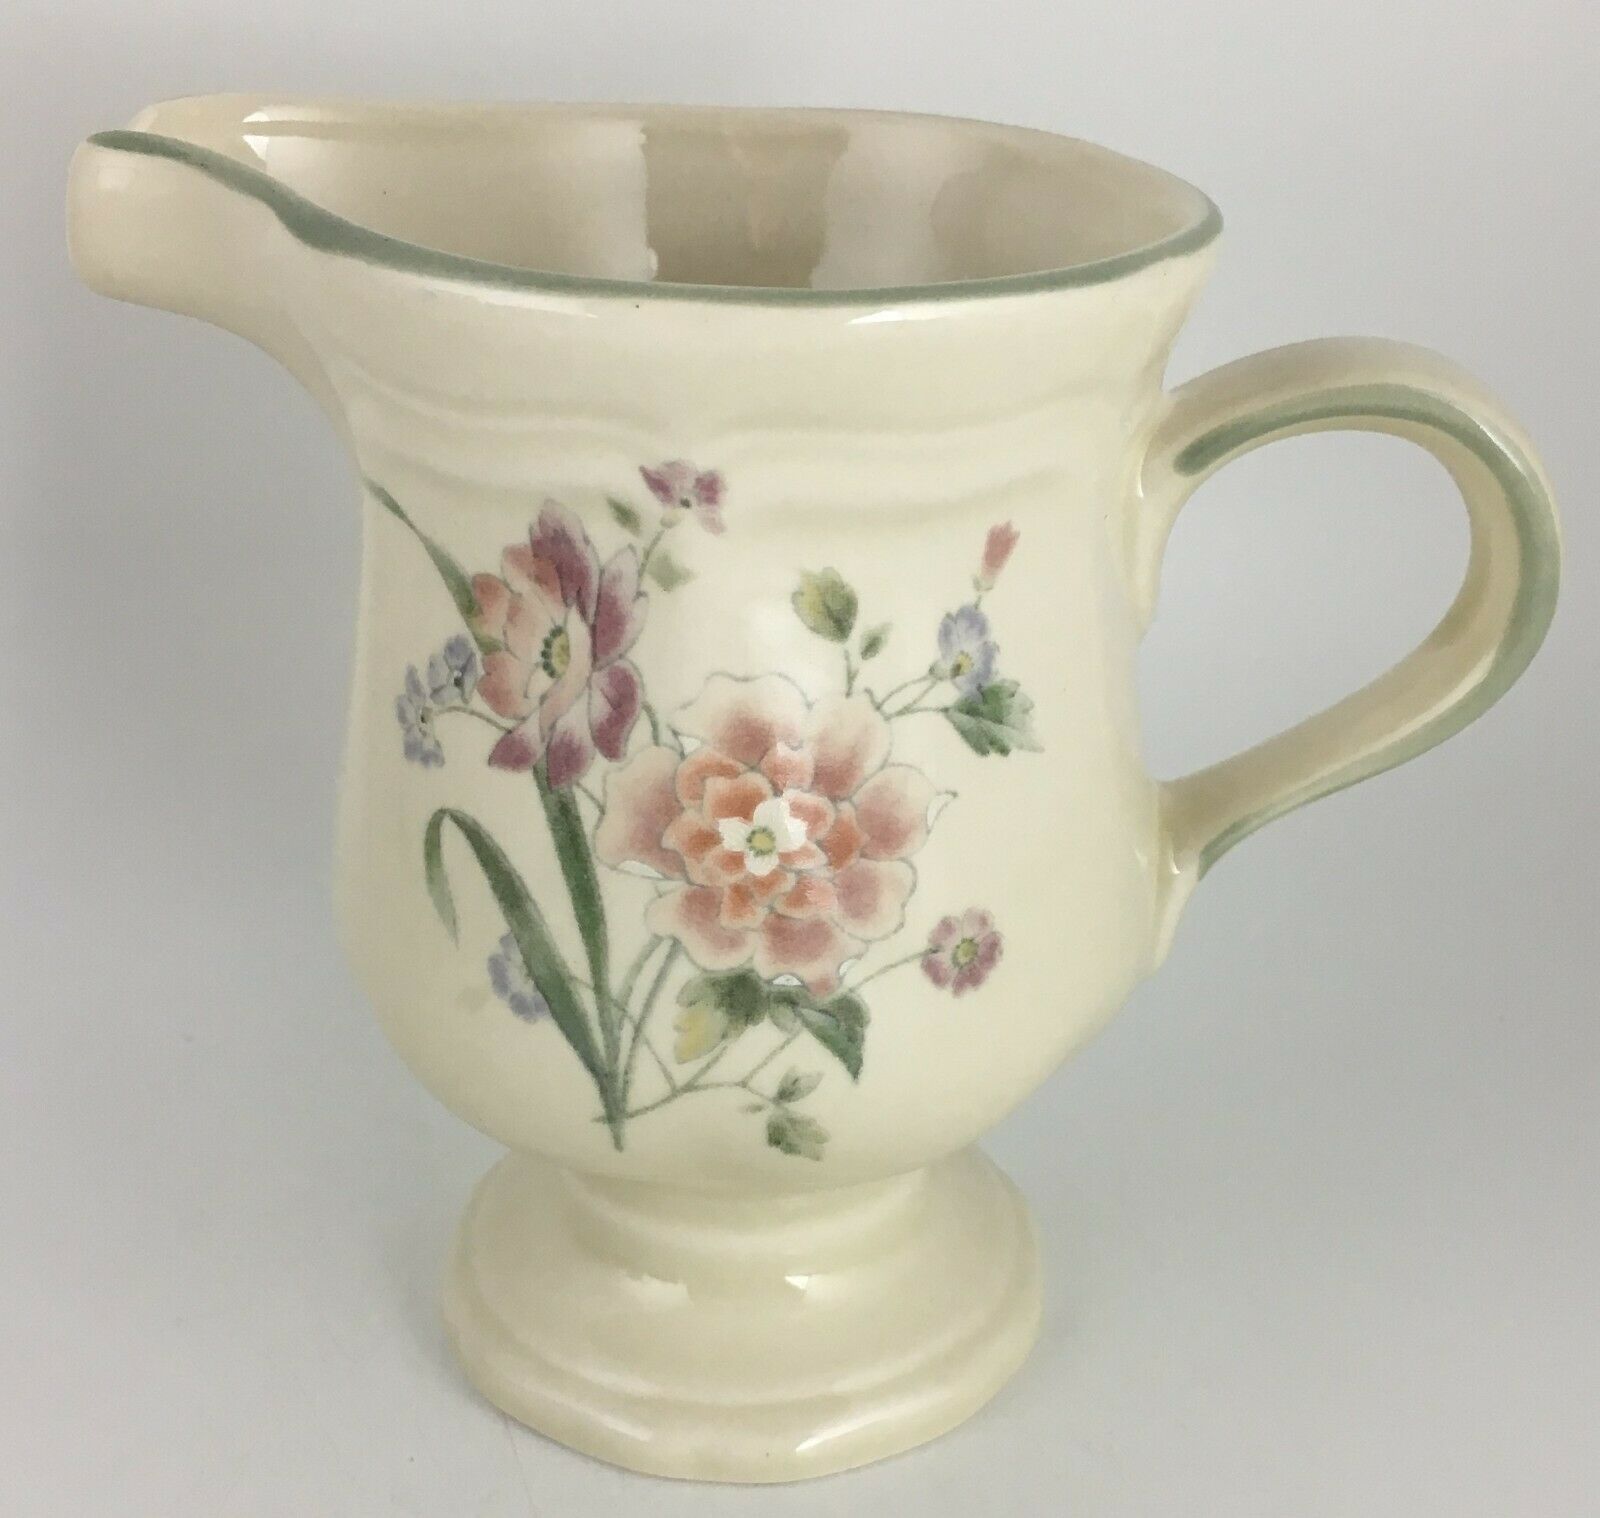 Primary image for Mikasa Peony Bouquet F2013 Creamer